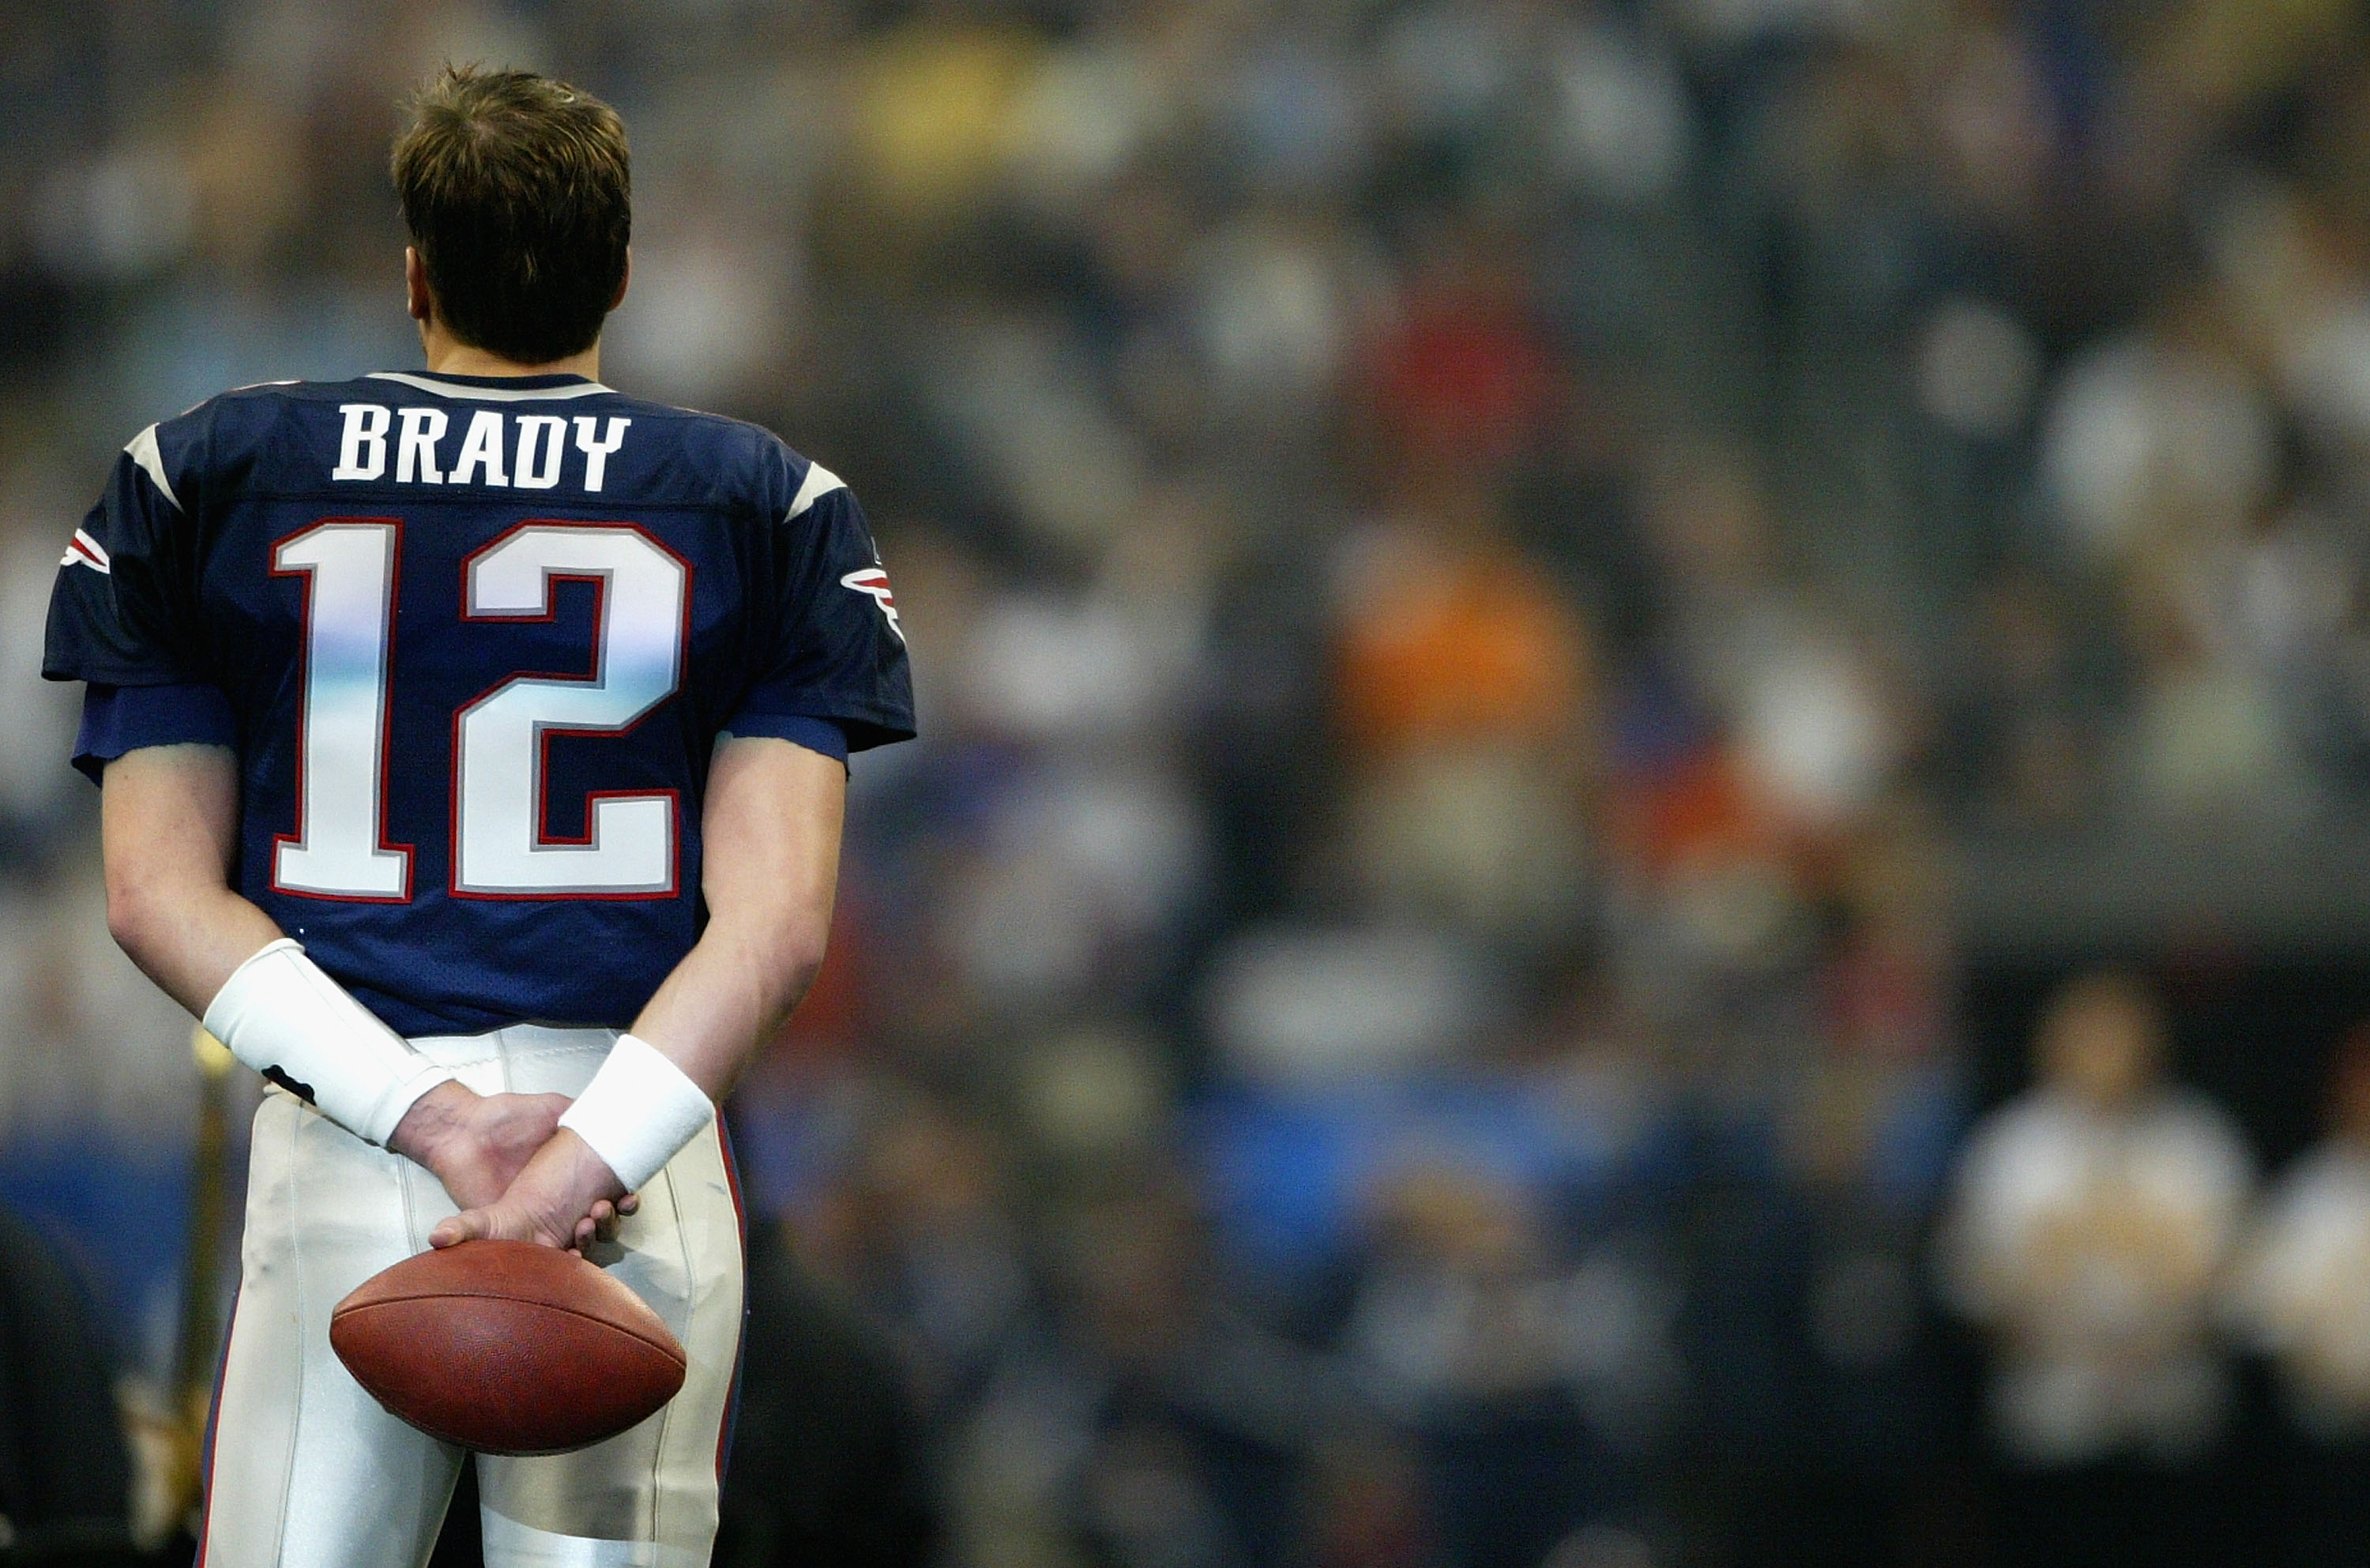 Tom Brady looks on before Super Bowl XXXVIII between the New England Patriots and the Carolina Panthers in 2004.